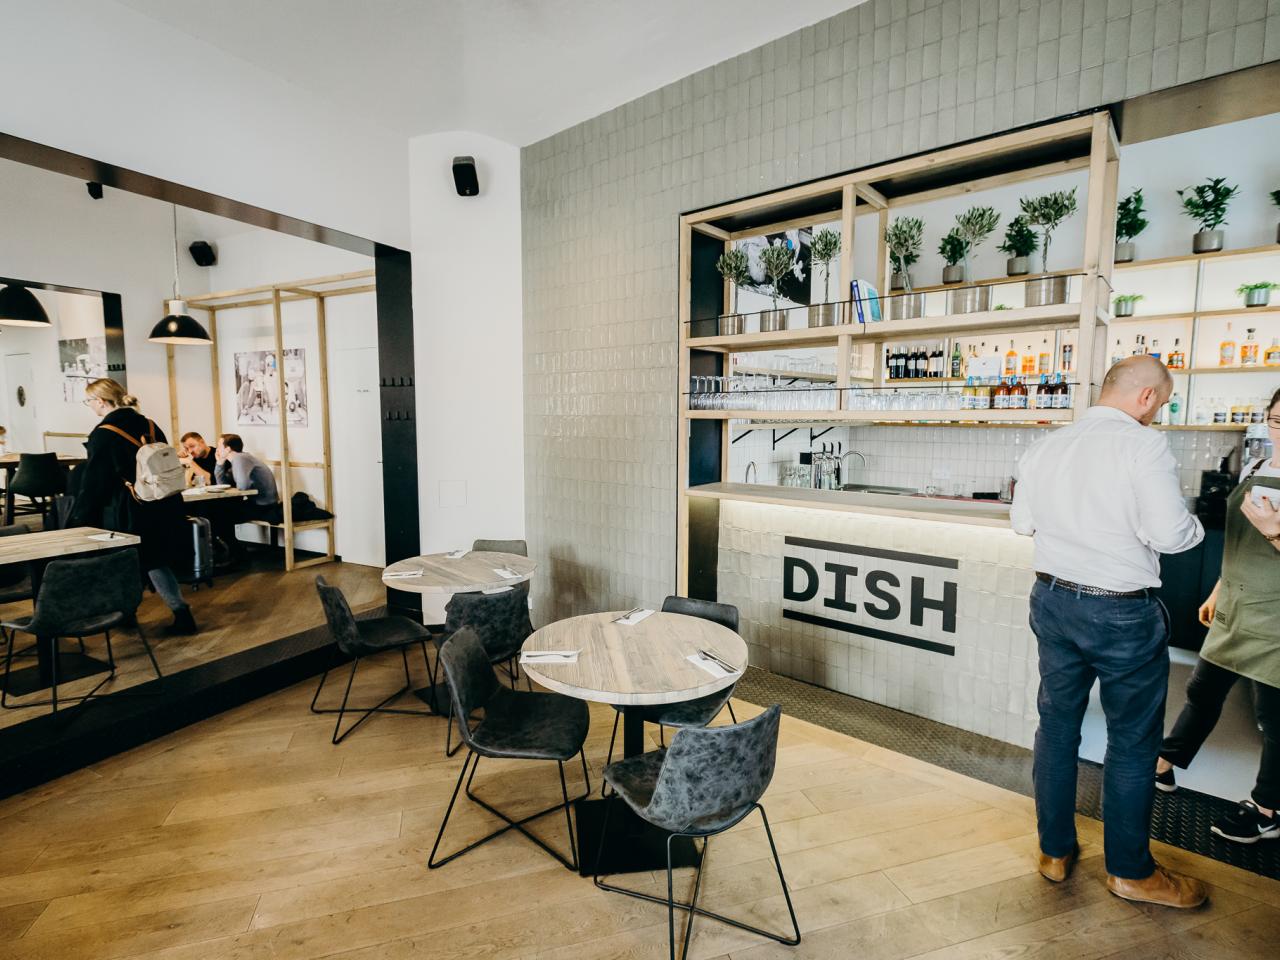 We have found this chic place for the new branch of Dish Burger